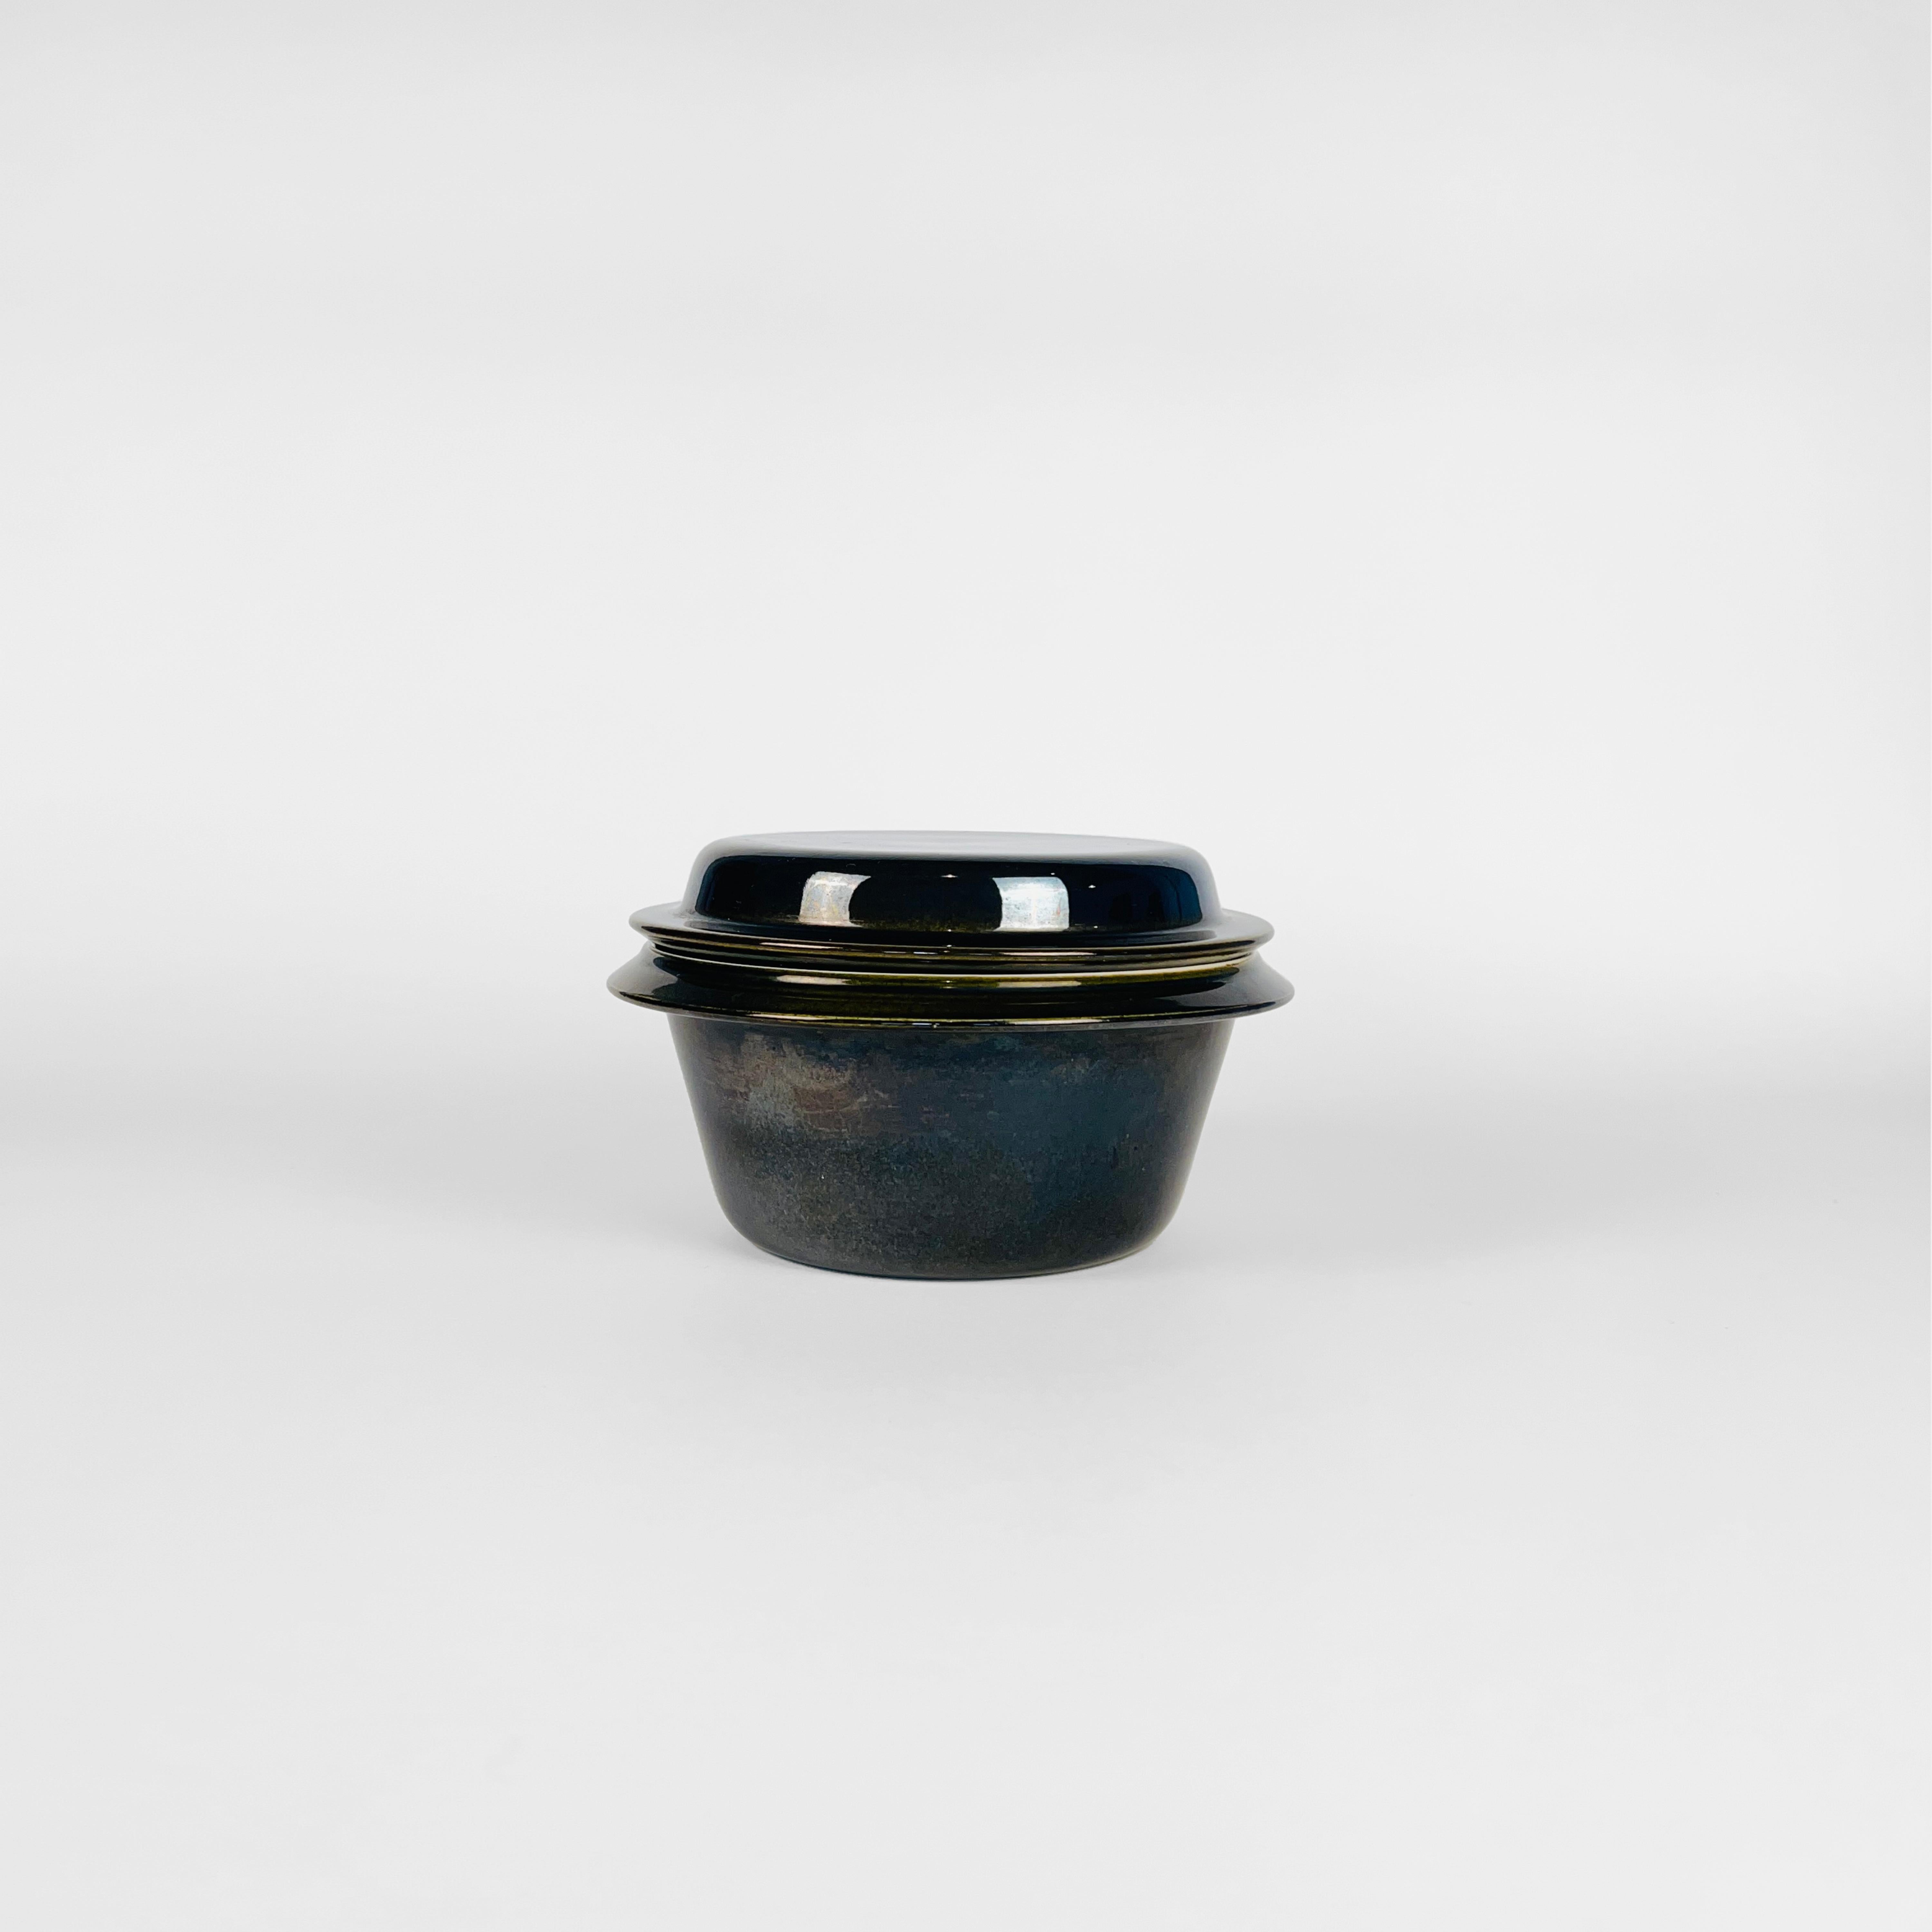 Bowl designed by Ingvar Olsen for Royal Copenhagen Aluminia Faience in 1959.
Exterior is finished in black, and the interior in glossy milky white.